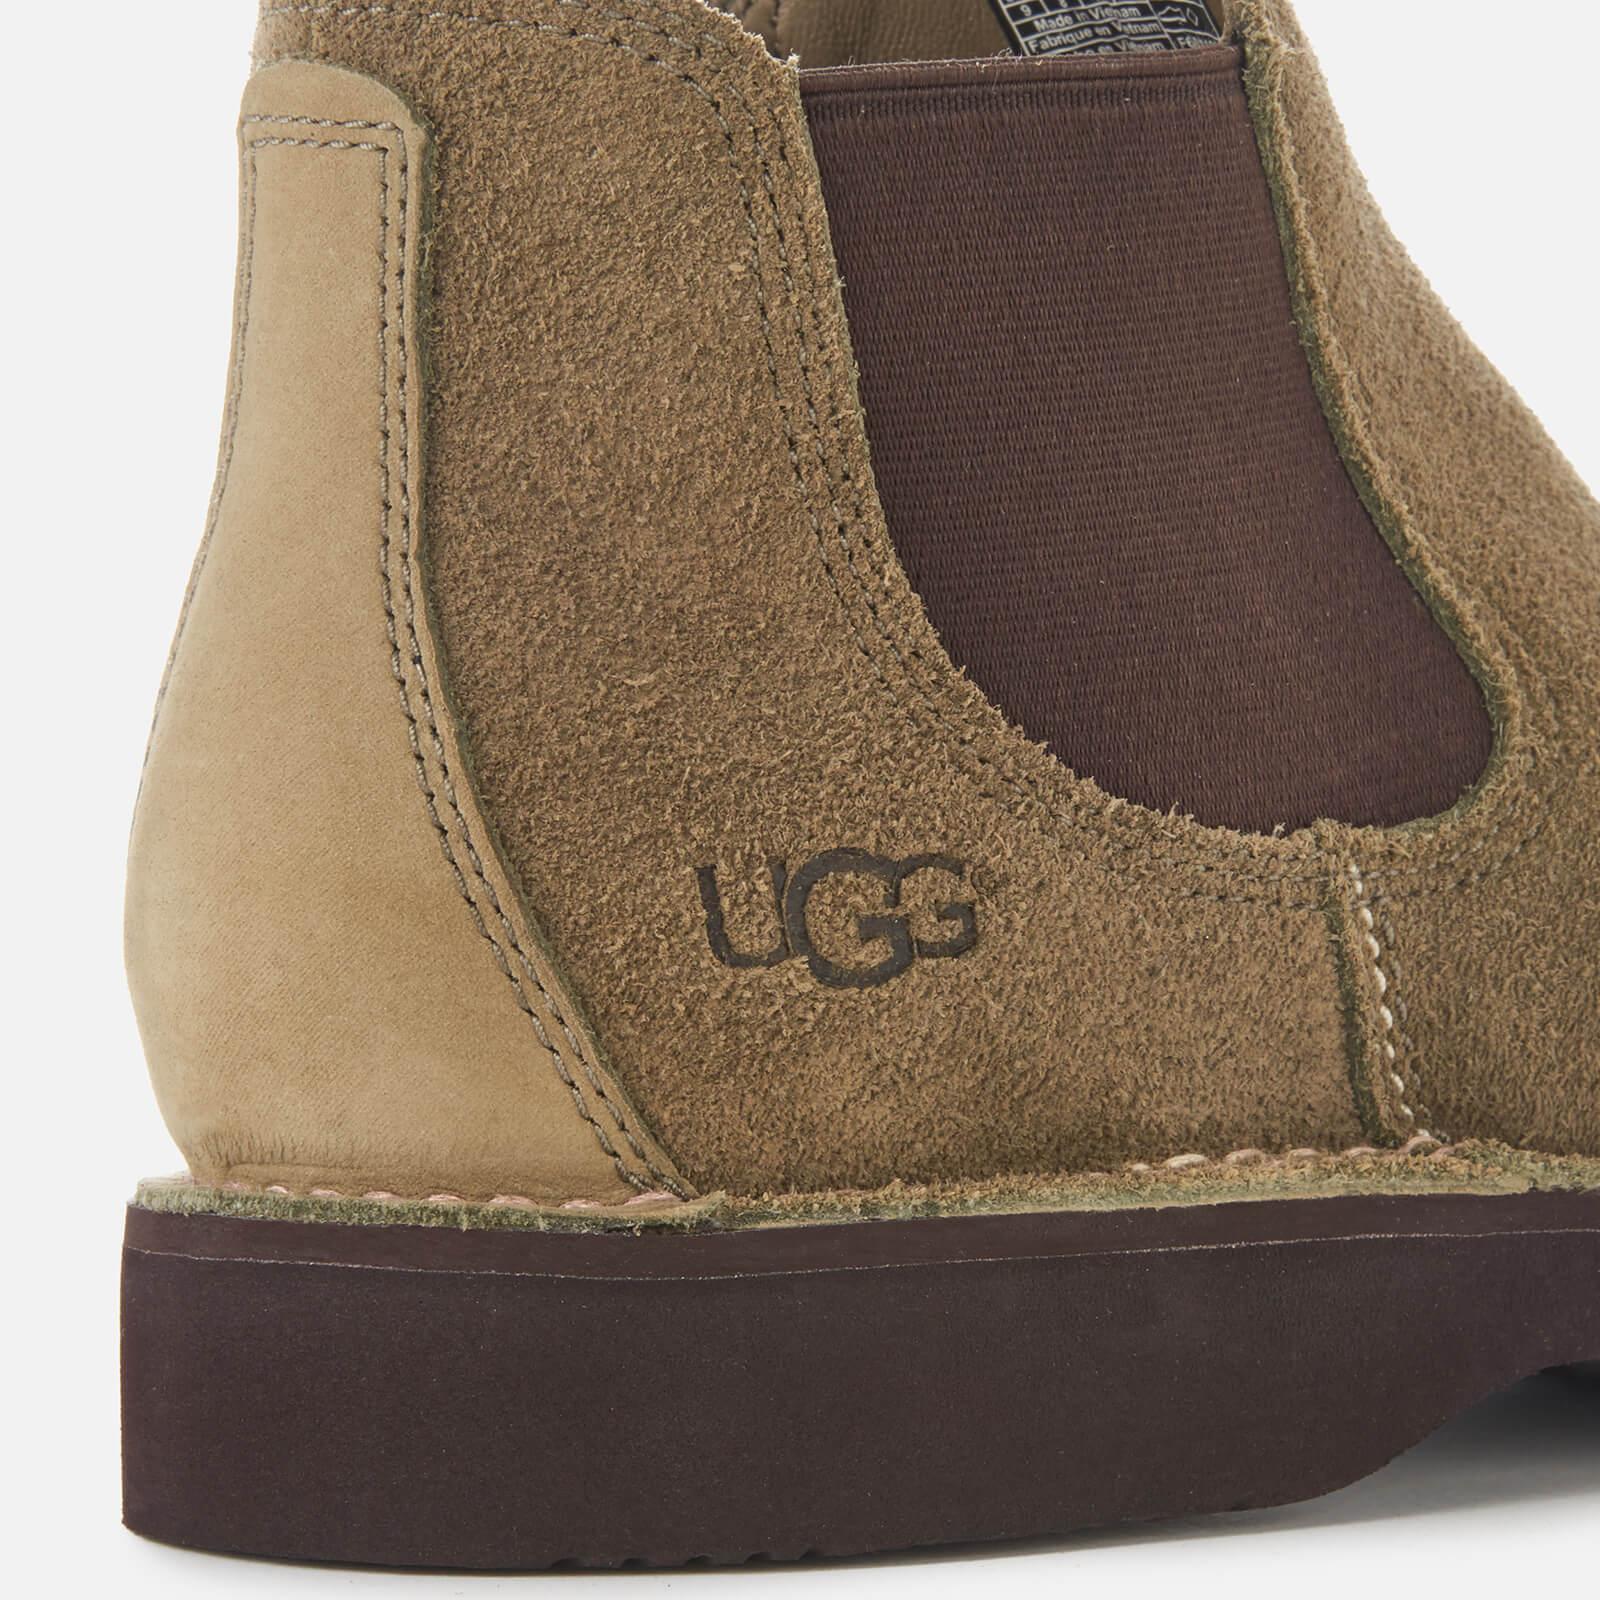 UGG Camino Suede Chelsea Boot in Taupe (Brown) for Men - Lyst